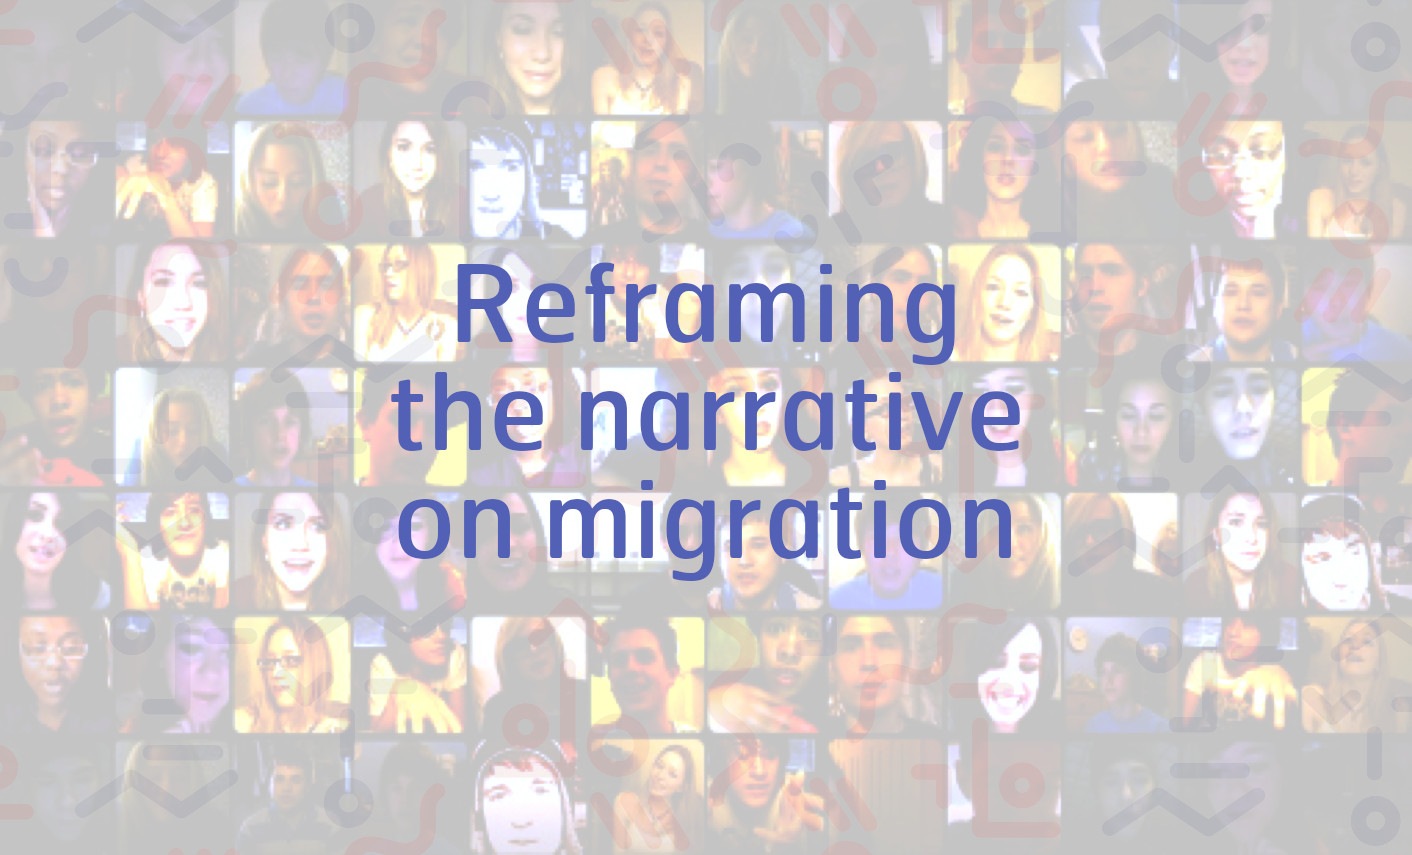 Reframing the narrative on migration